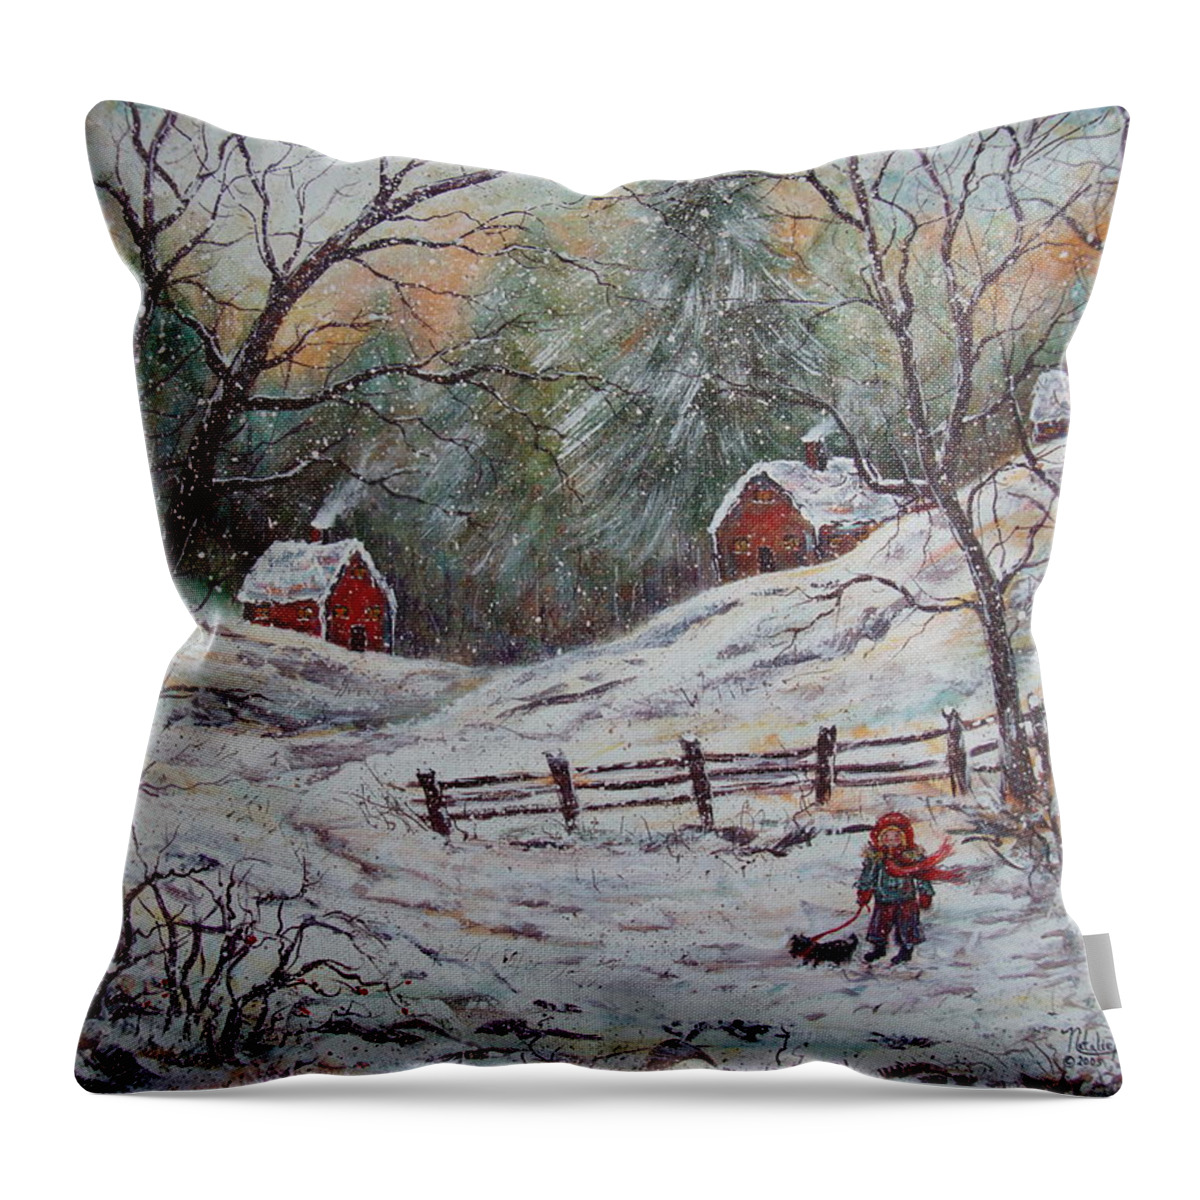 Landscape Throw Pillow featuring the painting Snowy Walk. by Natalie Holland